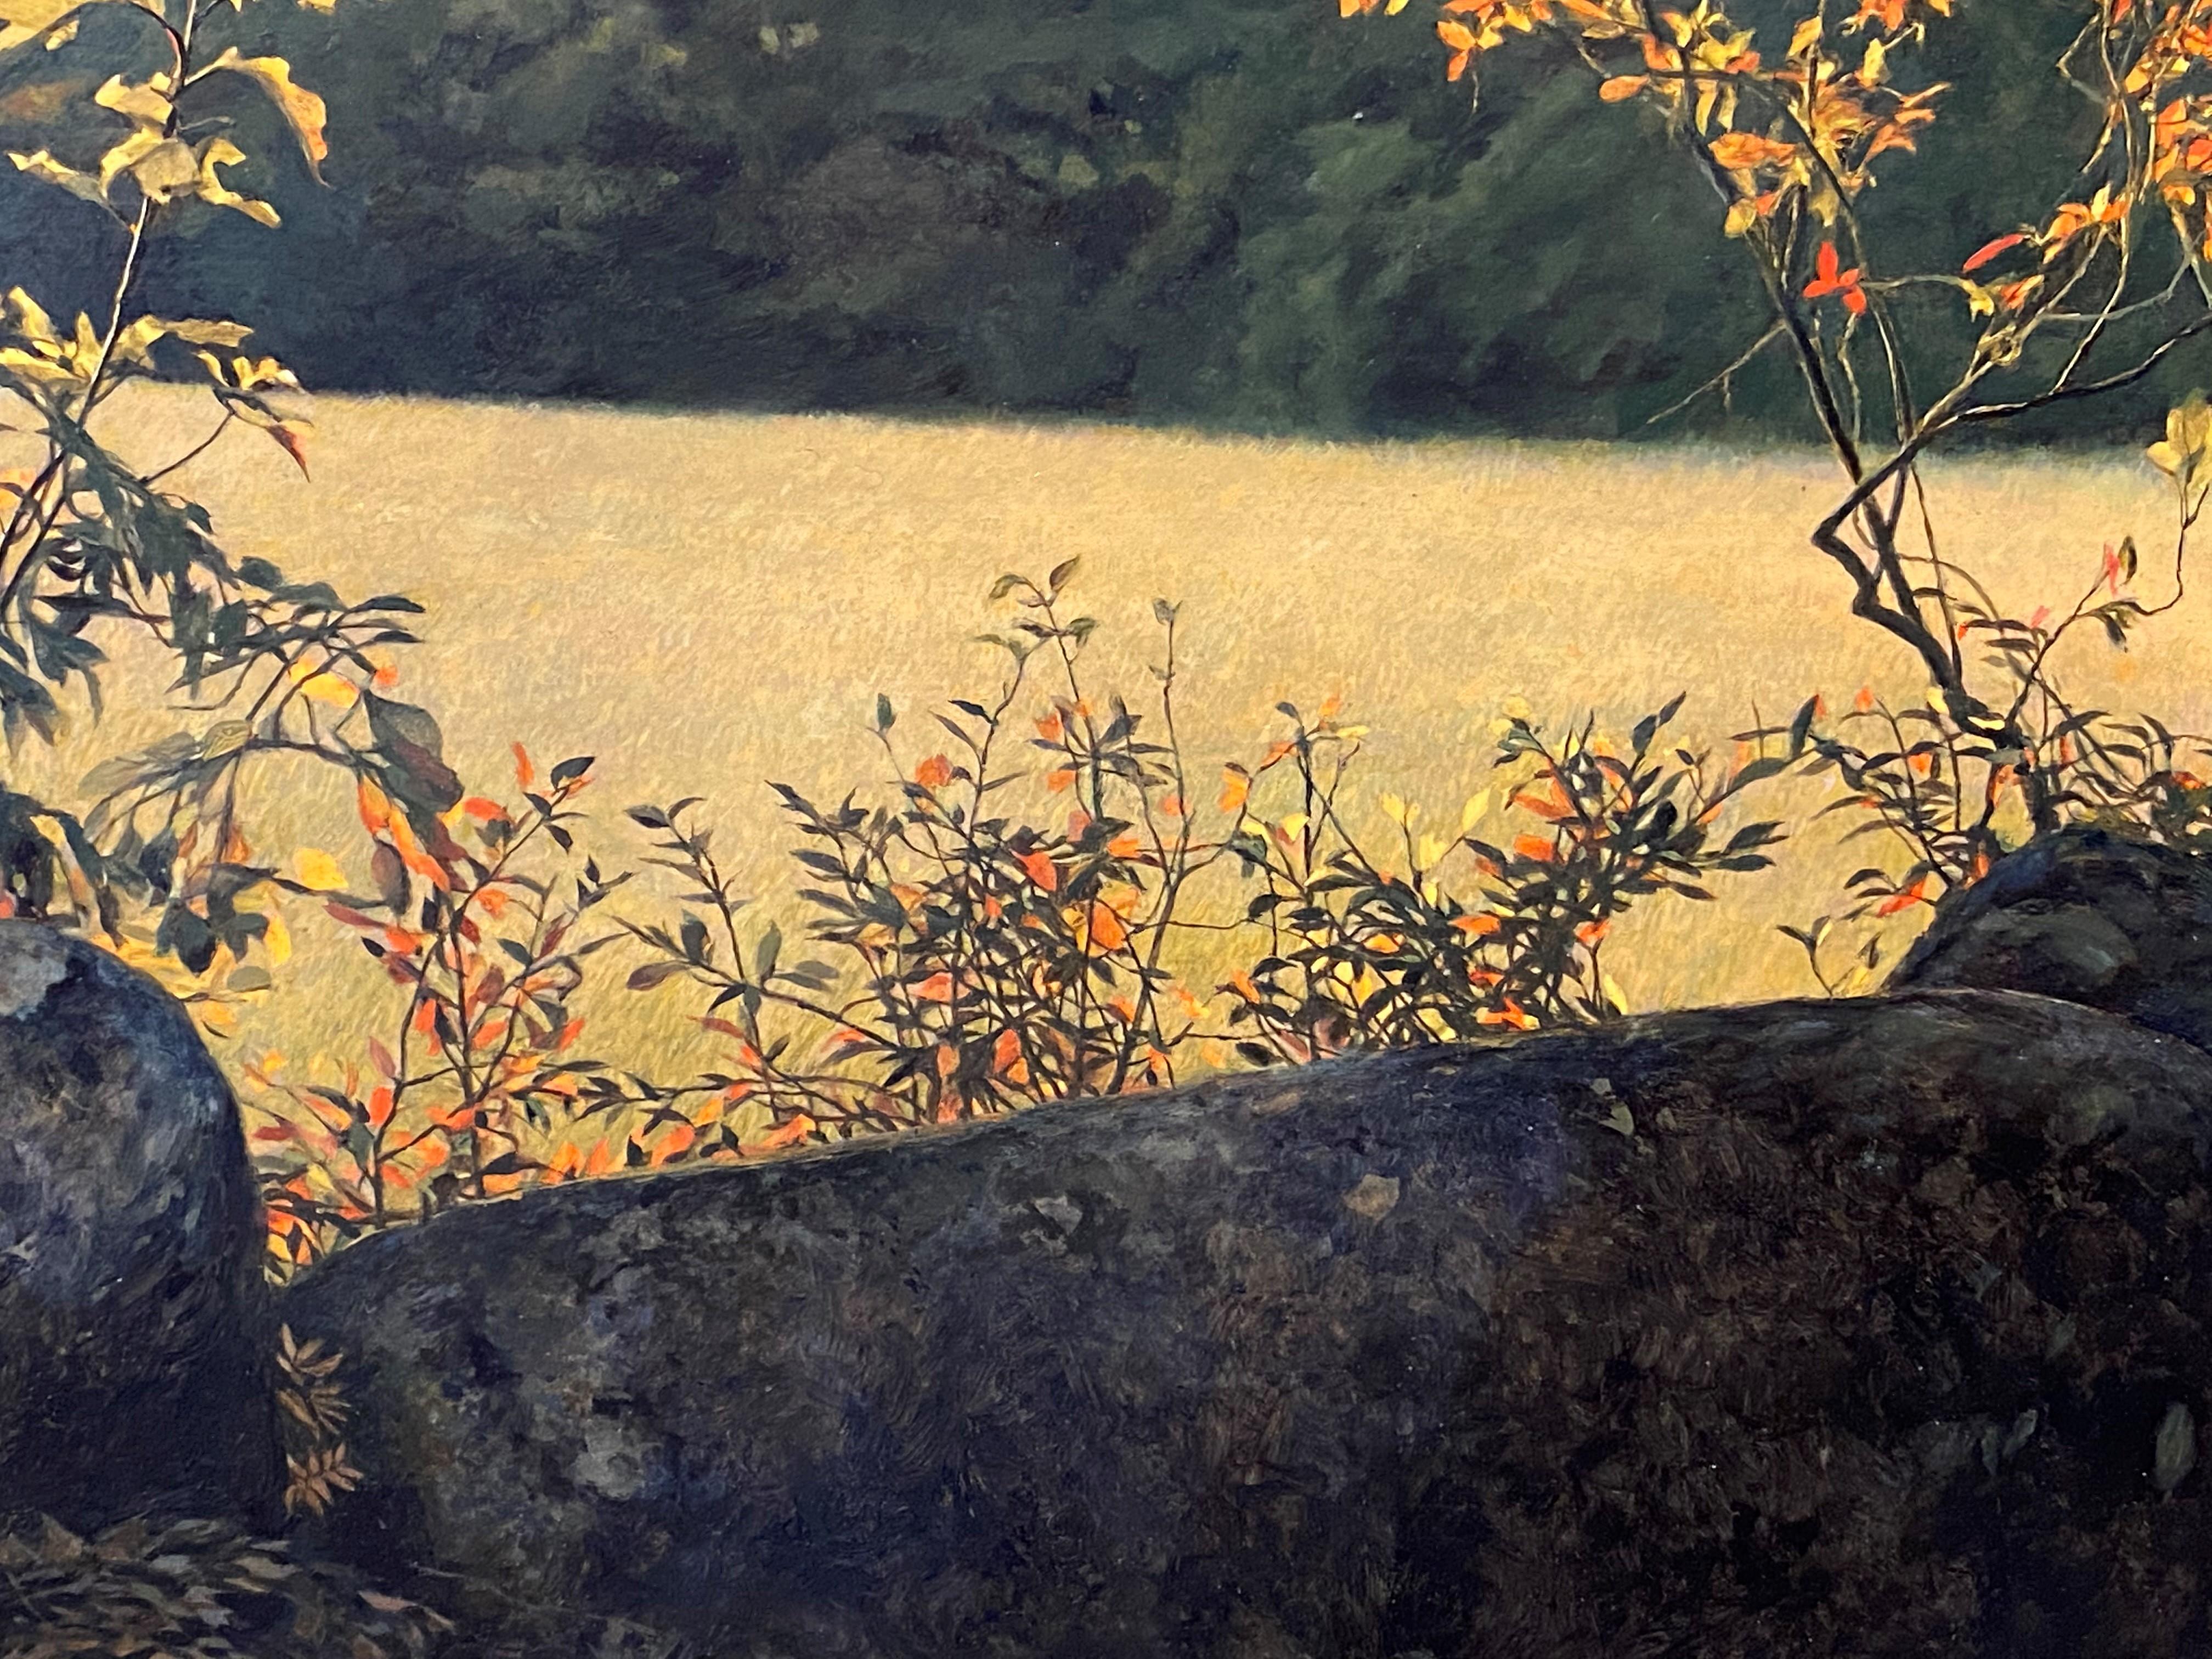 Golden Afternoon, Mount Monadnock, NH - Realist Painting by Erick Ingraham